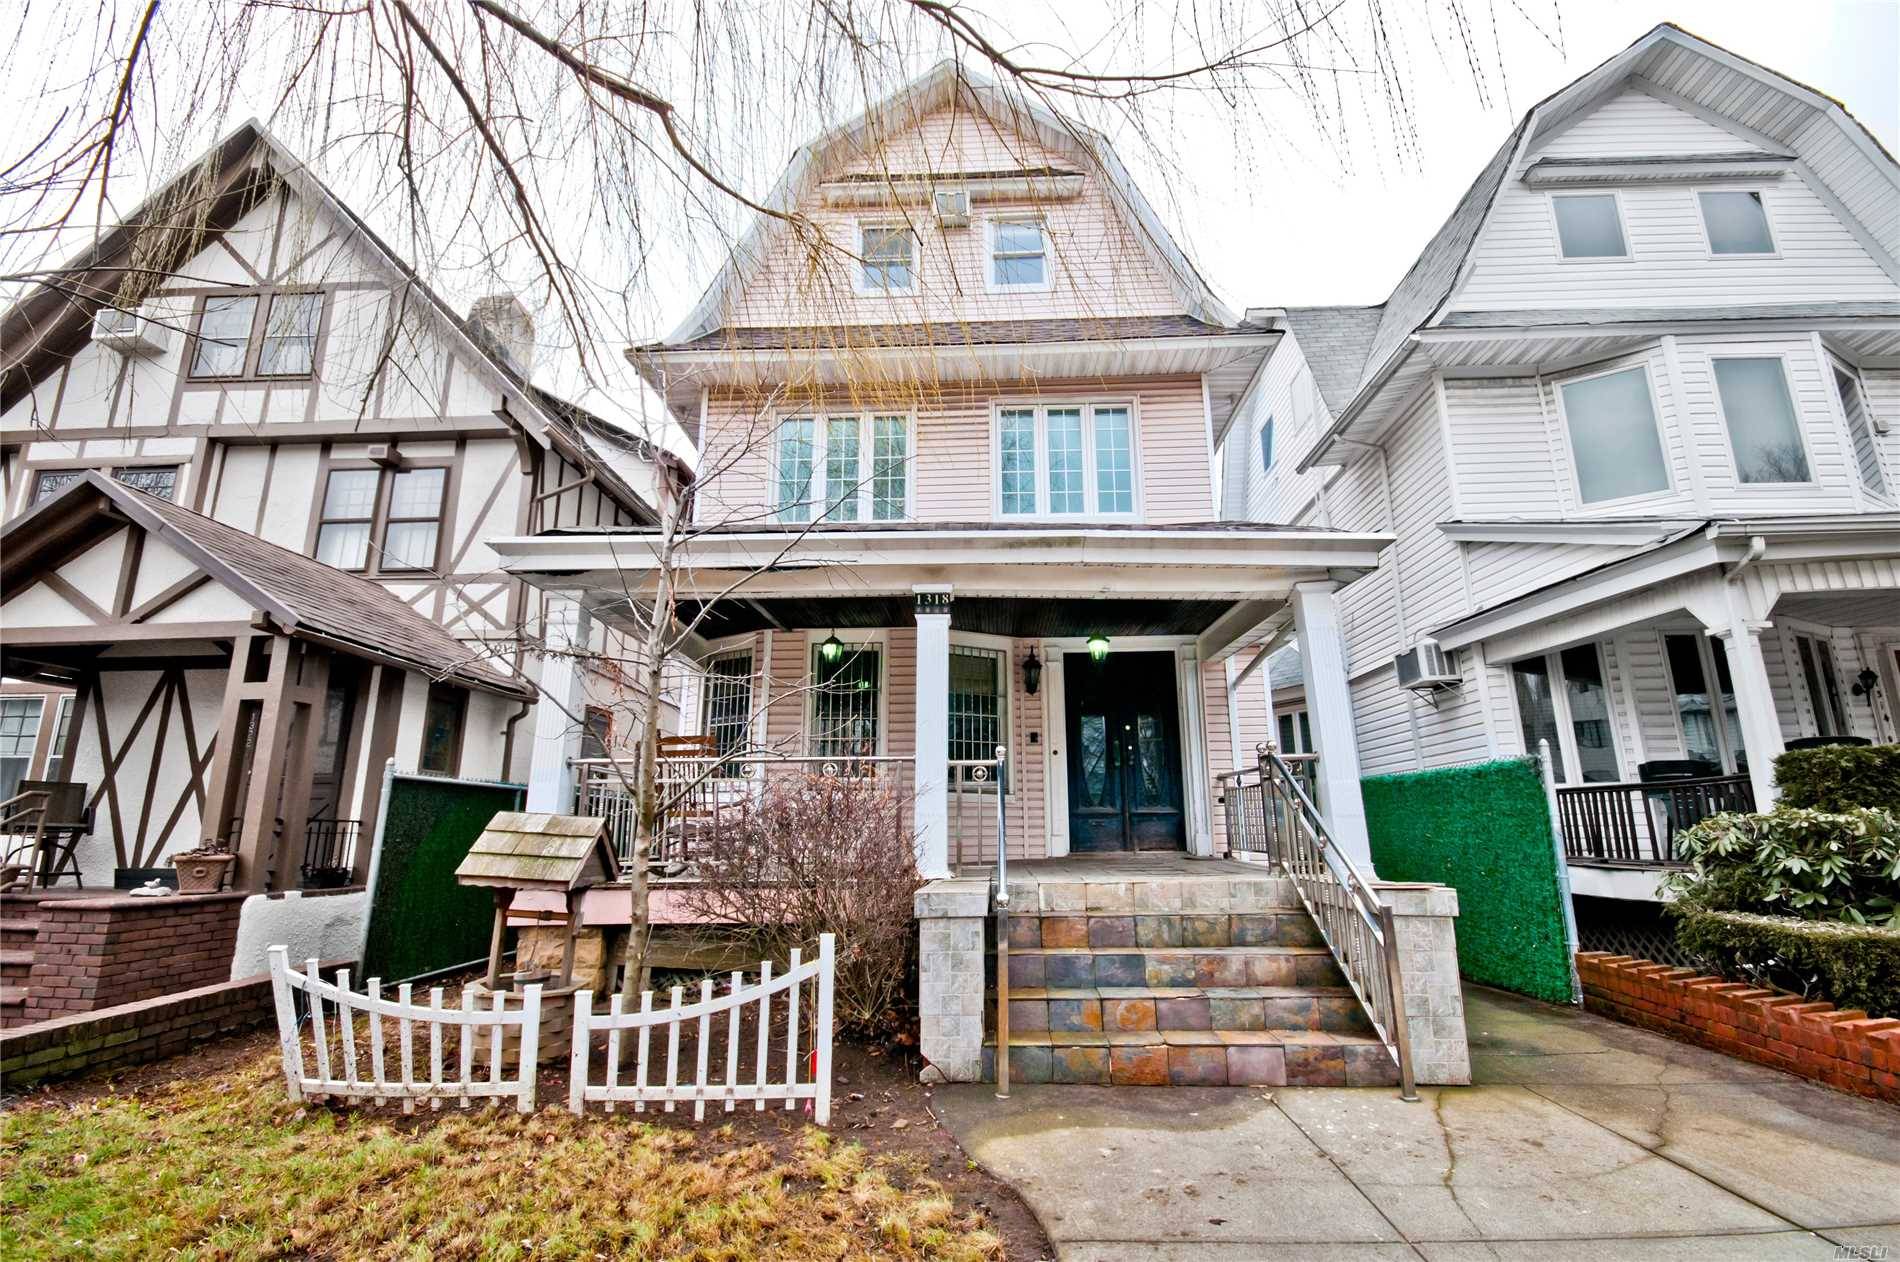 Large Victorian In Prime Location,Quaint Wrap Around Porch,5 Bedrooms Converted To 4.